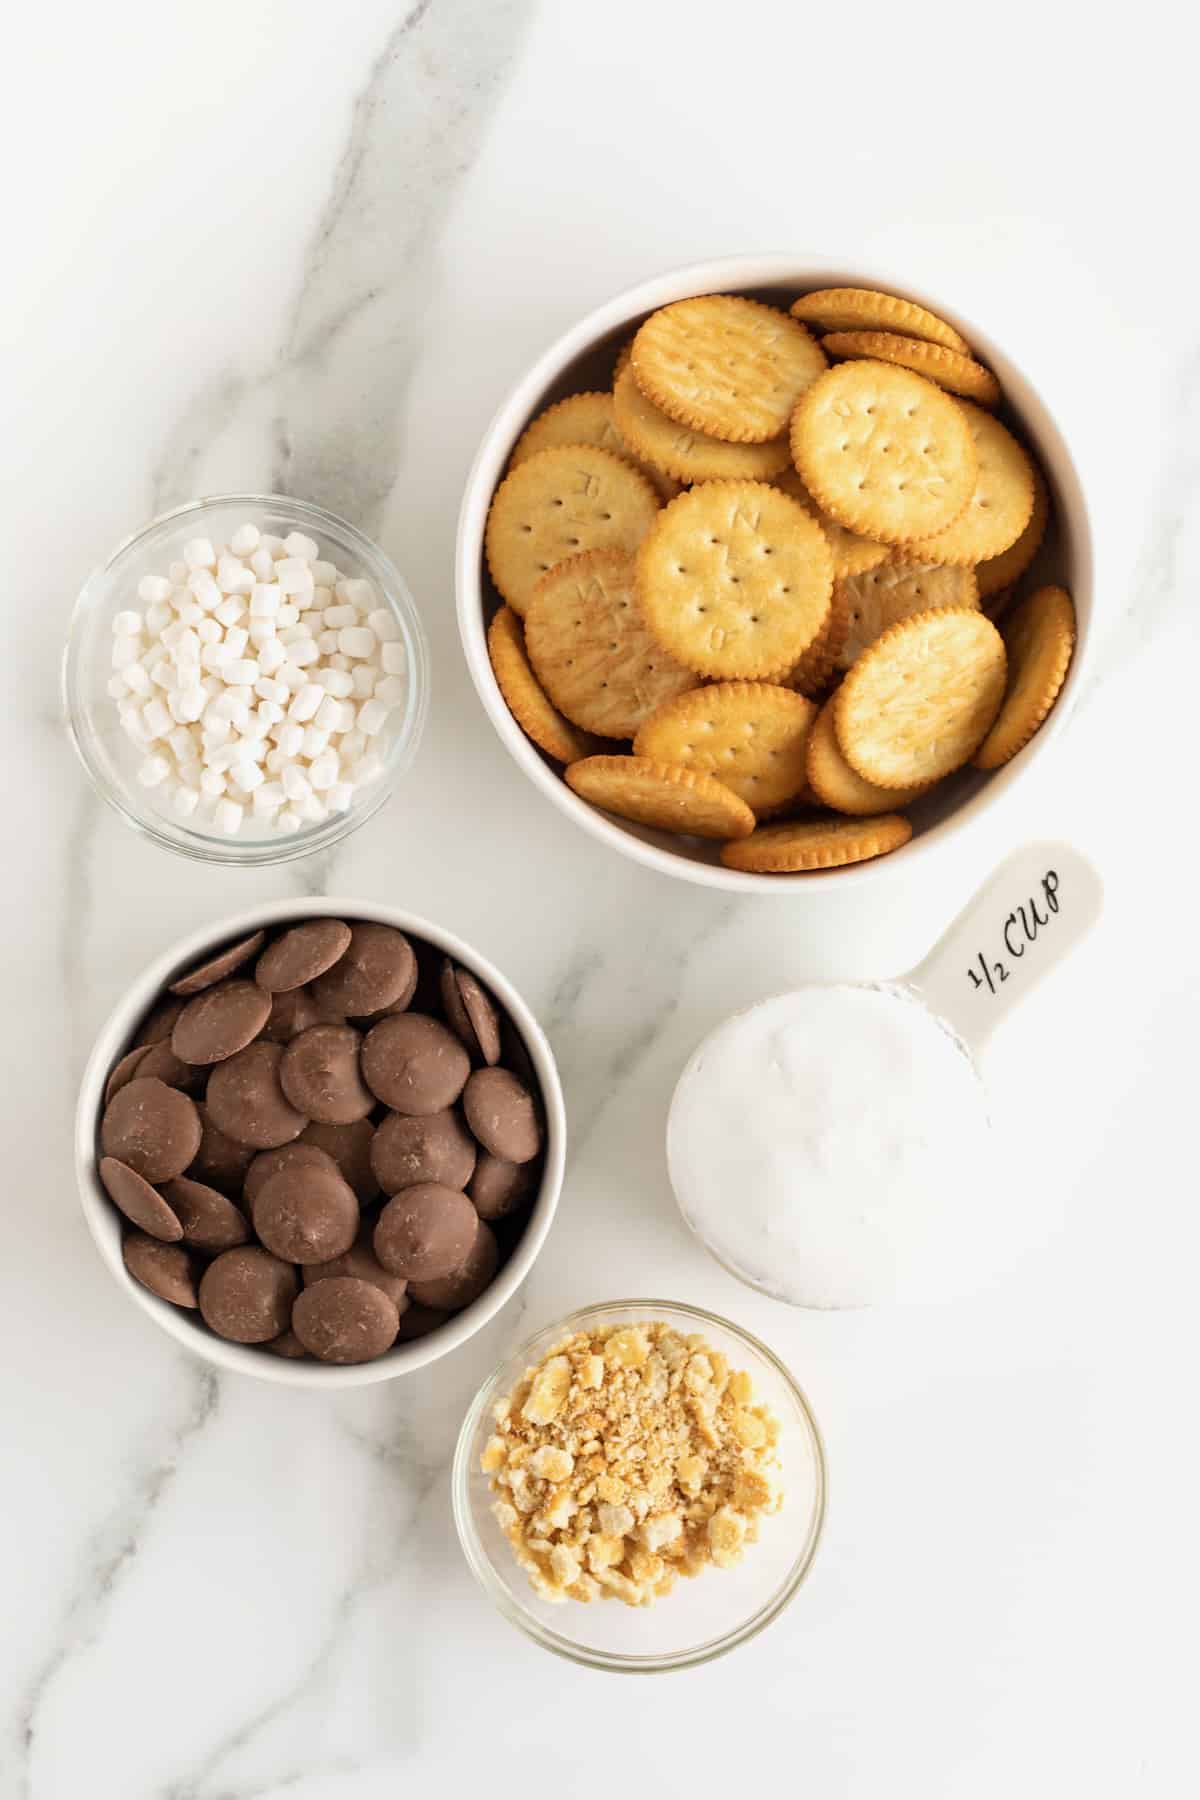 Ritz crackers, marshmallow bits, crushed cracker bits, marshmallow creme, and chocolate candy wafers in small glass dishes on a white marble counter.